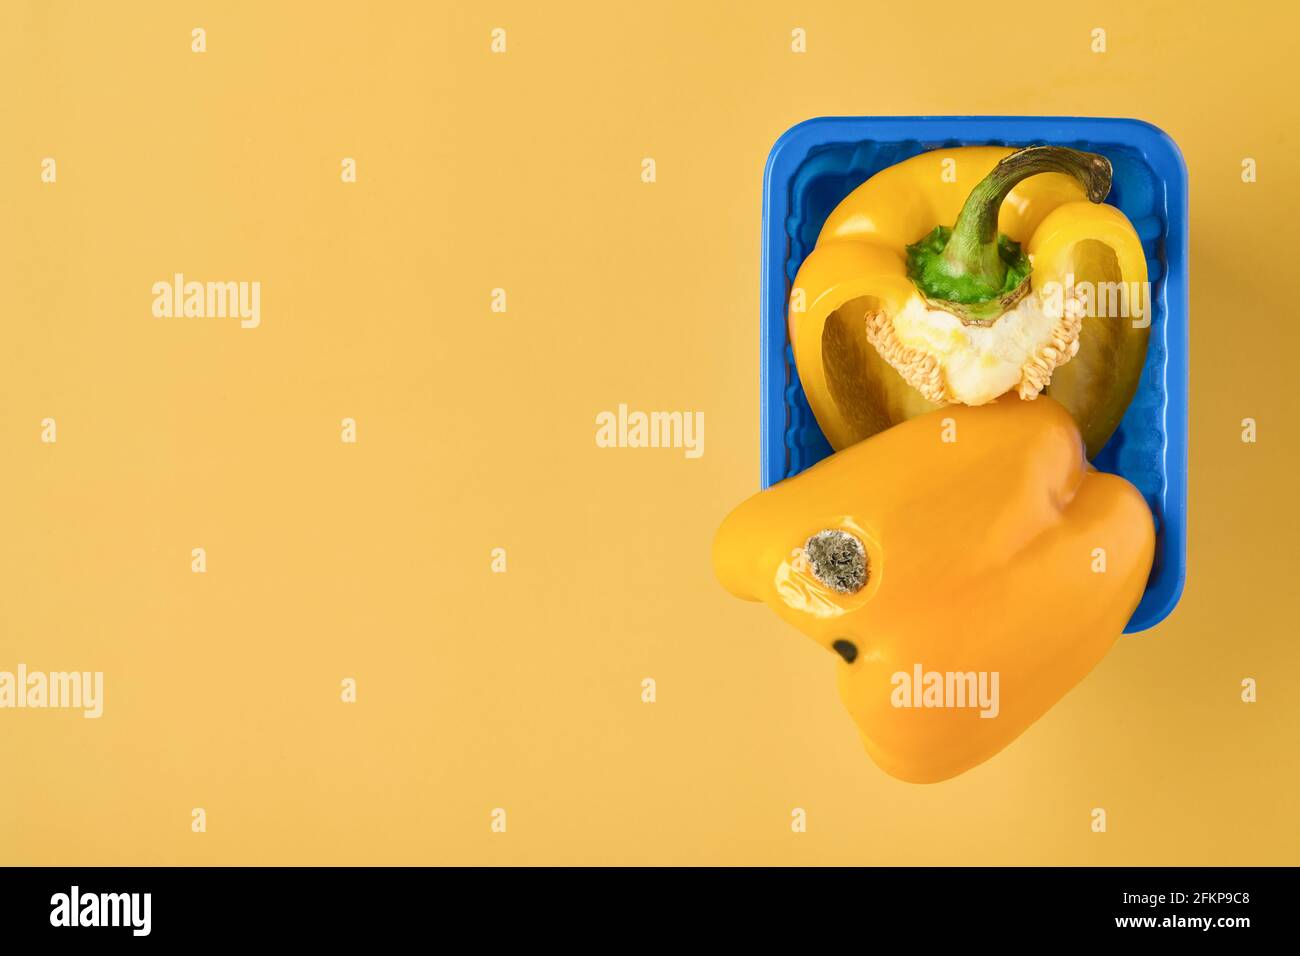 Moldy and wrinkled rotten yellow peppers. Concept of unhealthy, decompose, spoiled vegetables. Garbage dump rotten food on yellow background. Top view Stock Photo